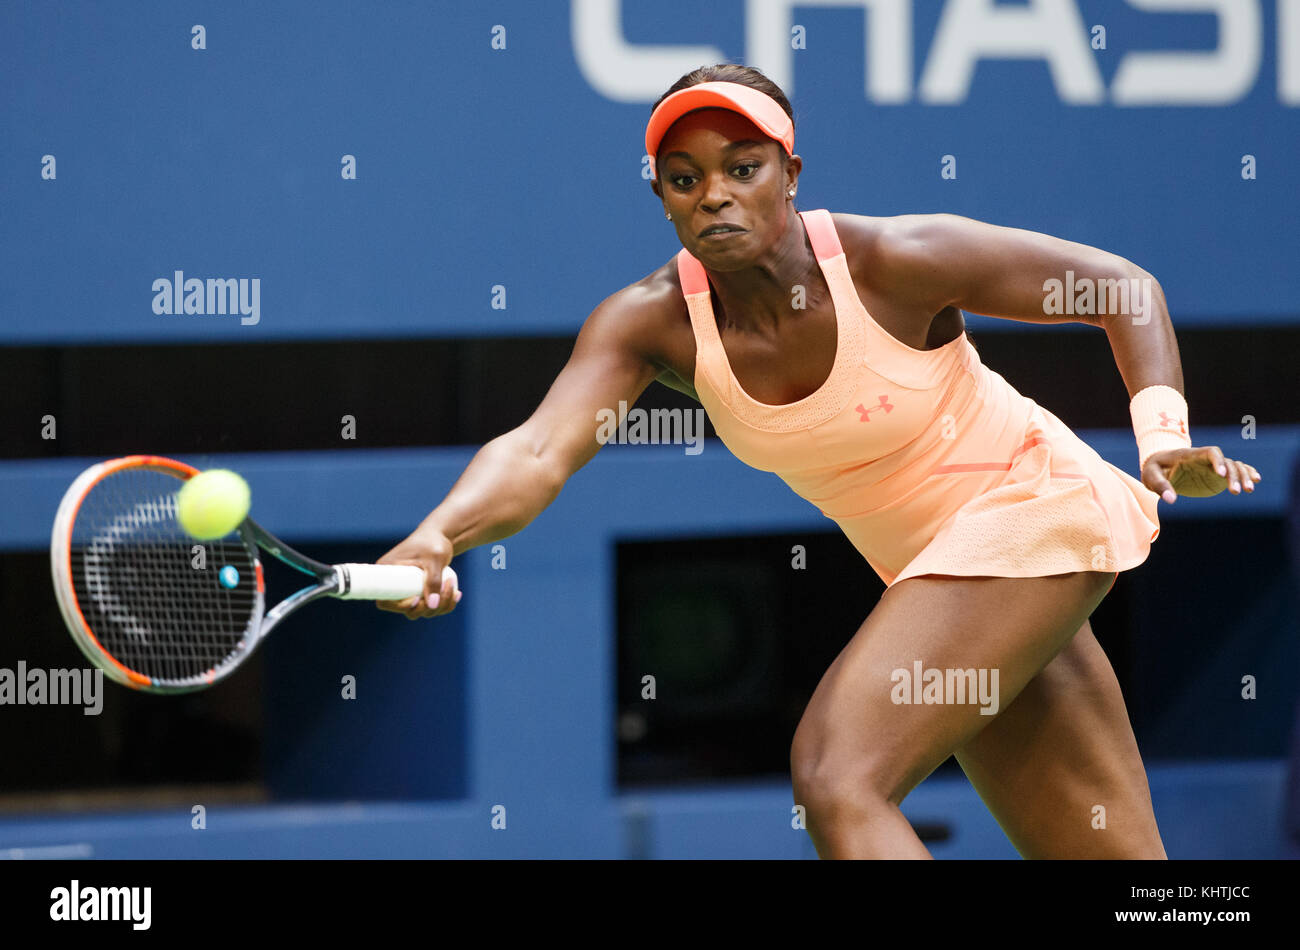 American tennis player SLOANE STEPHENS (USA) hitting a forehand shot during  women's singles match at US Open 2017 Tennis Championship, New York City  Stock Photo - Alamy